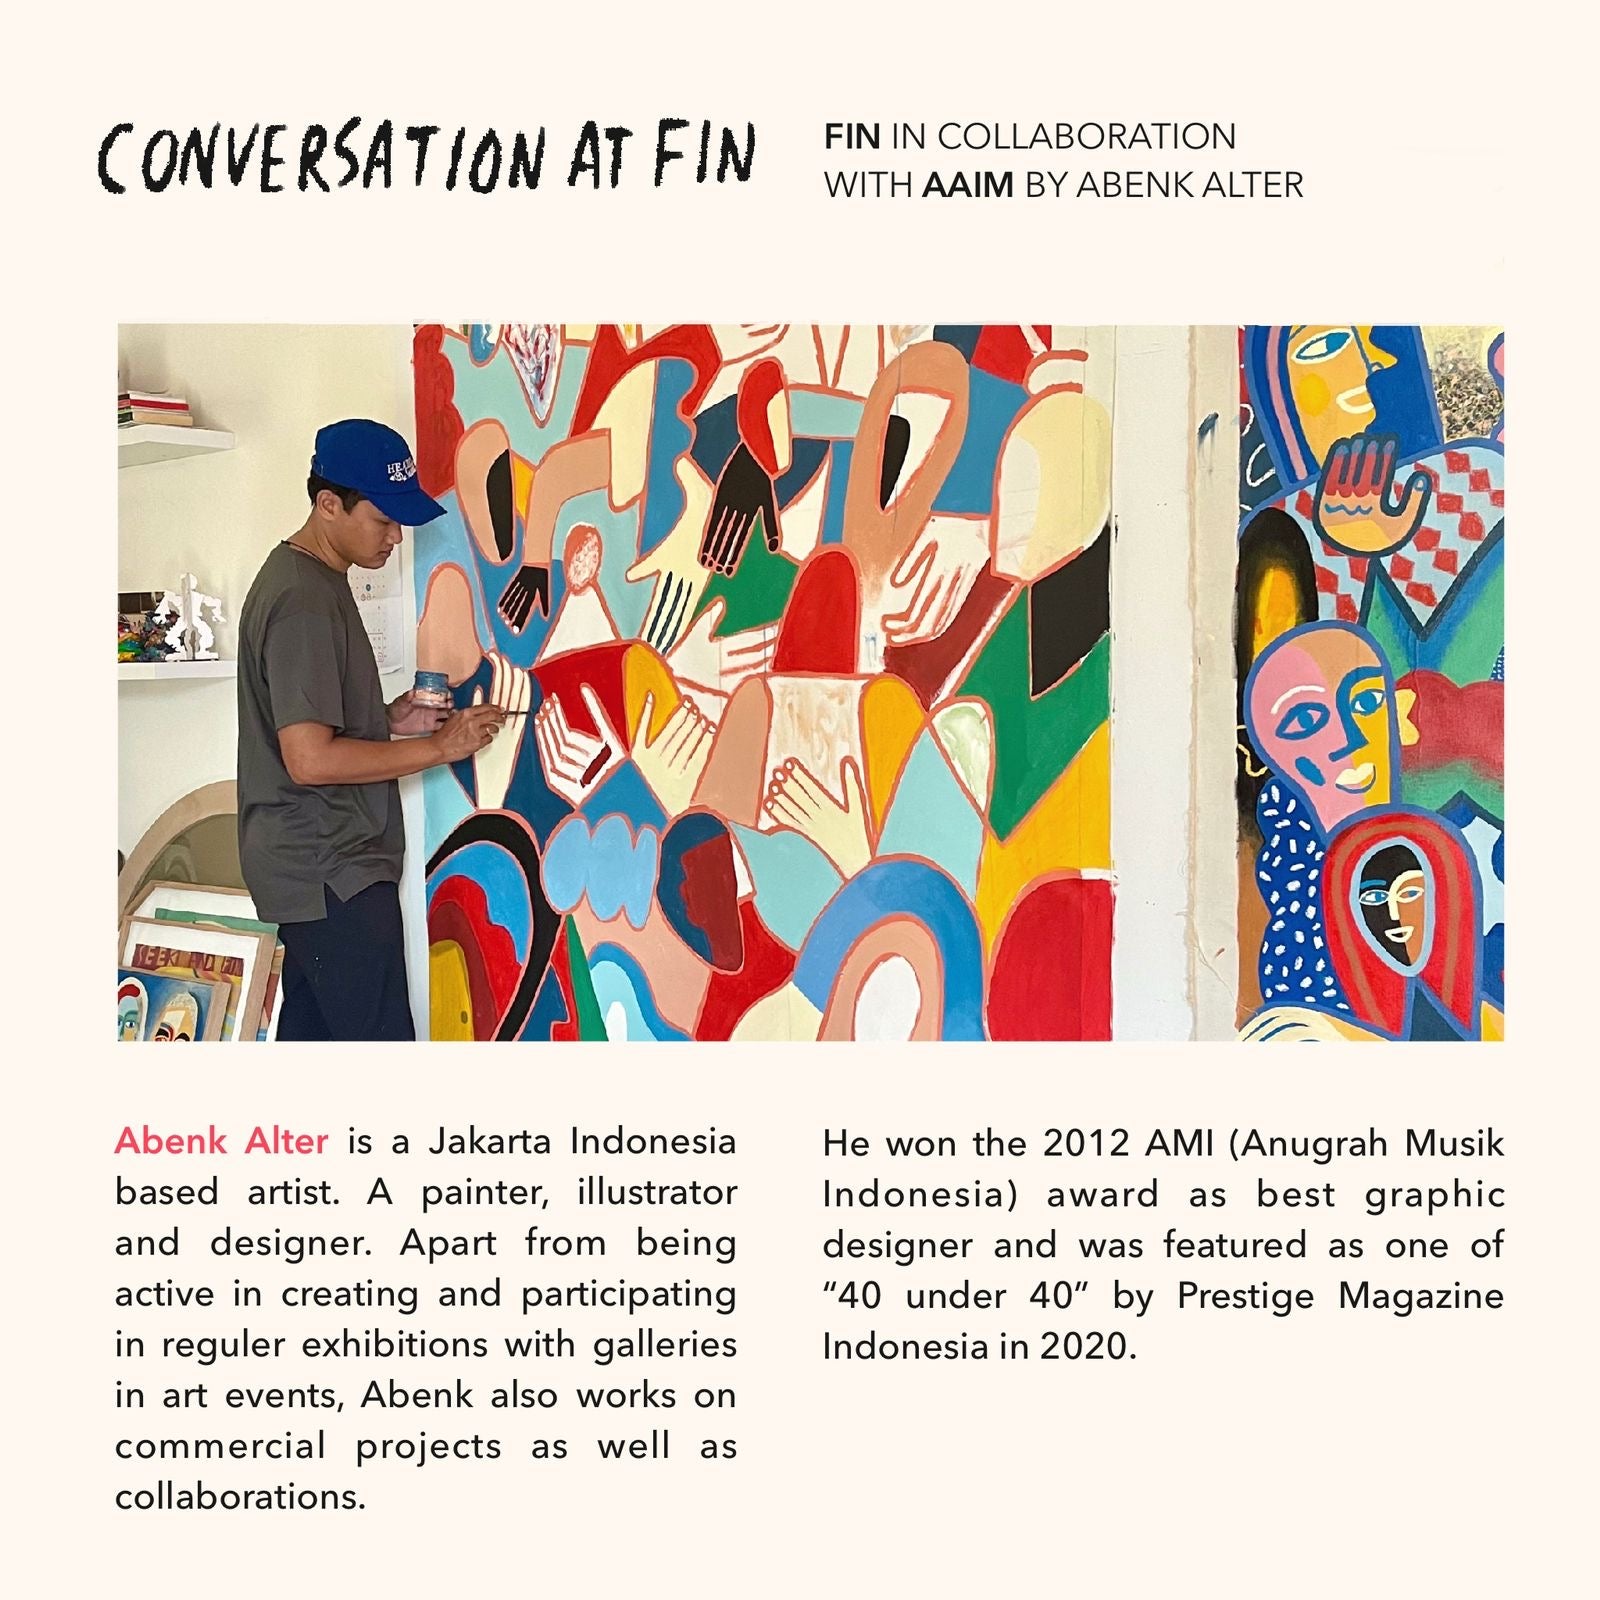 Conversations at FIN with Abenk Alter